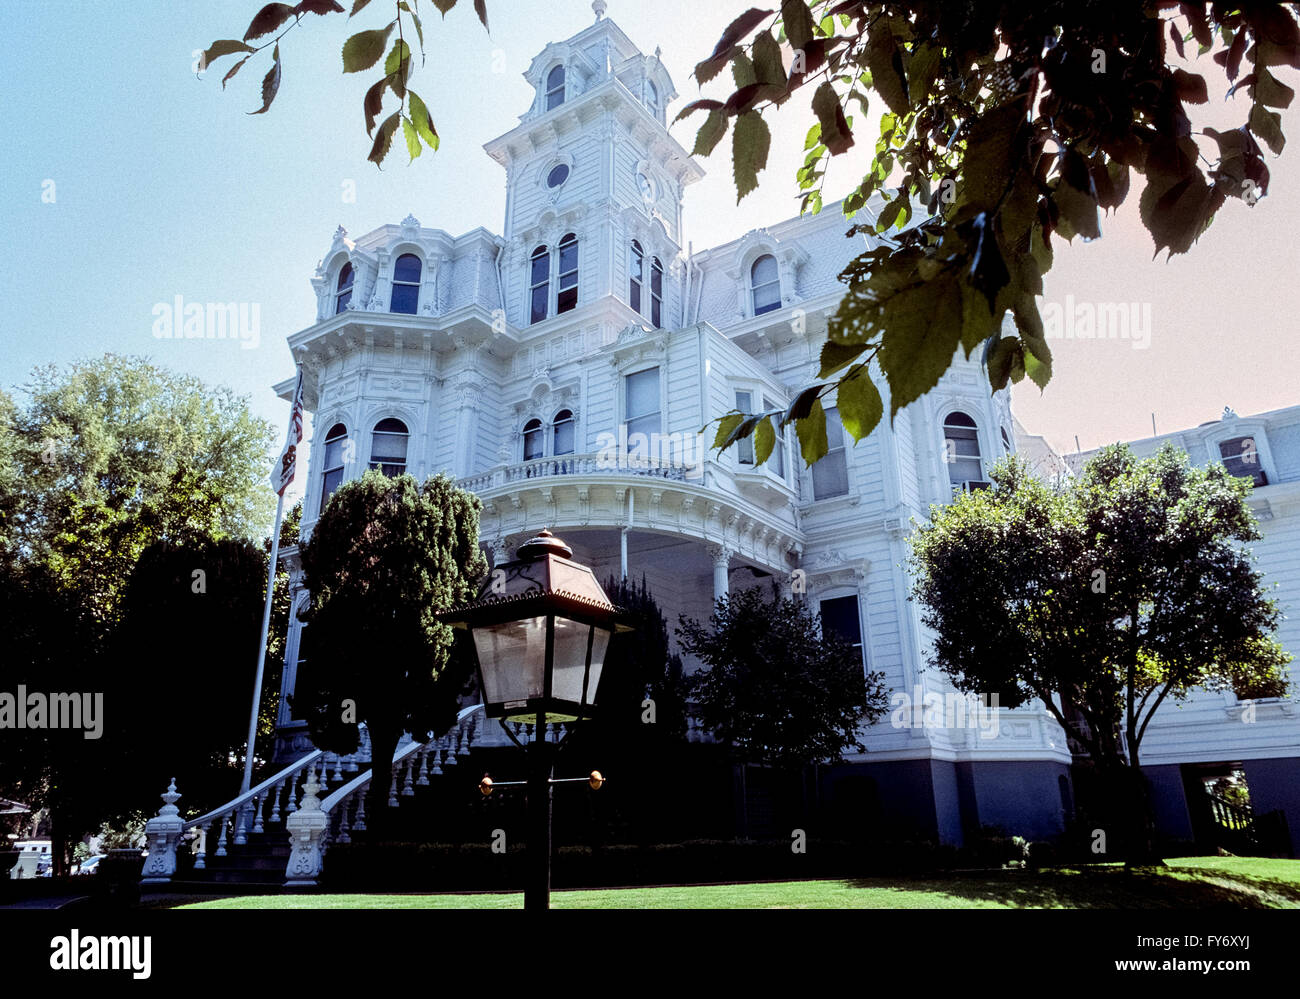 This 1877 Victorian mansion in Sacramento is once again home to the governor of the state of California, USA. The ornate three-story, 30-room wooden house served 13 governors and their families from 1903 to 1967 until the last residents, Nancy and Ronald Reagan, deemed it a fire trap and moved out. The dwelling was then opened to the public as the Governor's Mansion State Historic Park until 2015 when then governor, Jerry Brown, agreed to move in after major renovations were done. The official state residence is known for its Second Empire-Italianate styles of architecture. Stock Photo